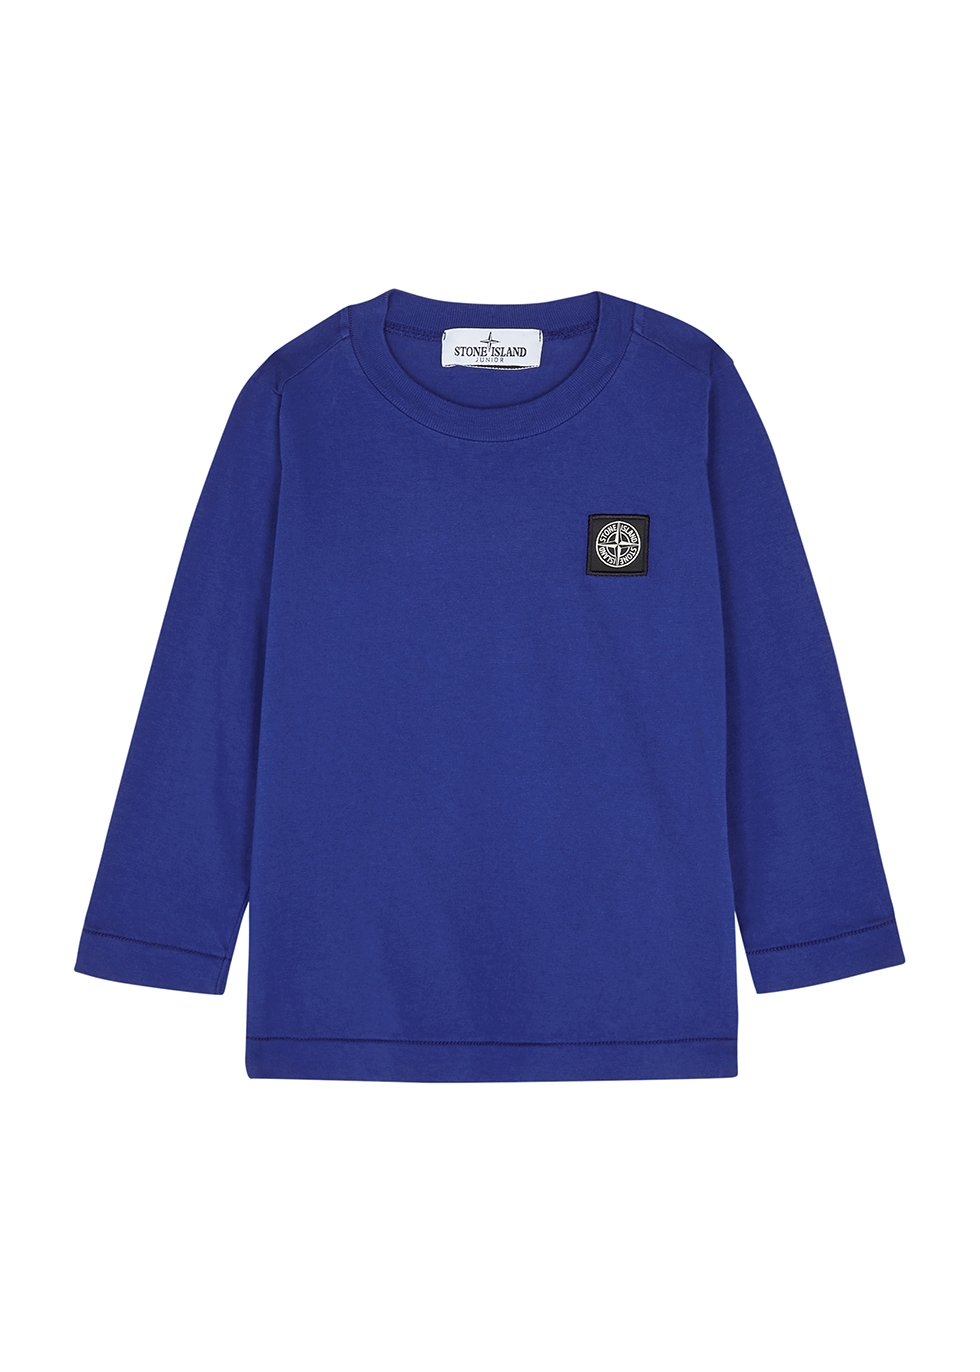 KIDS Blue cotton top (2-4 years)